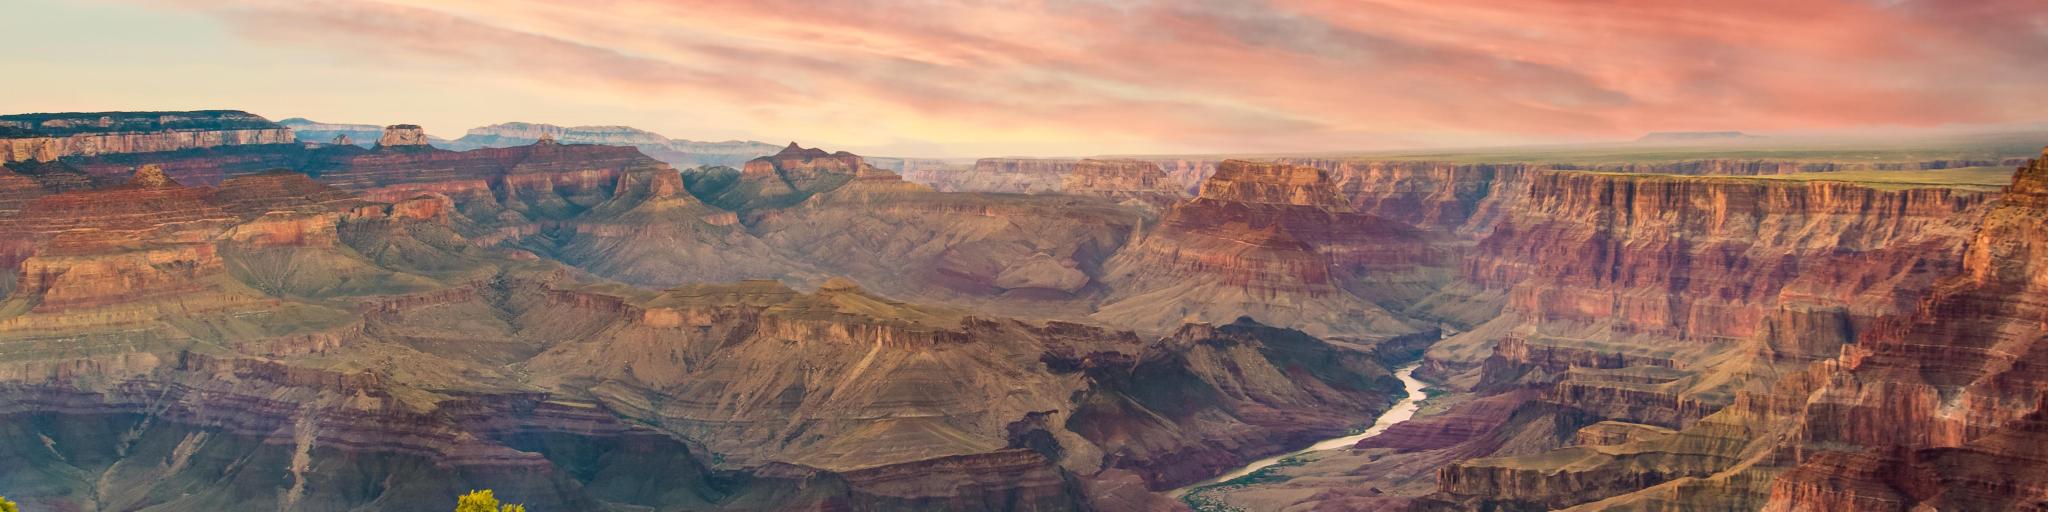 Grand Canyon, Arizona, USA with a panoramic view of the Colorado River at sunset with a red sky, bush in the foreground.